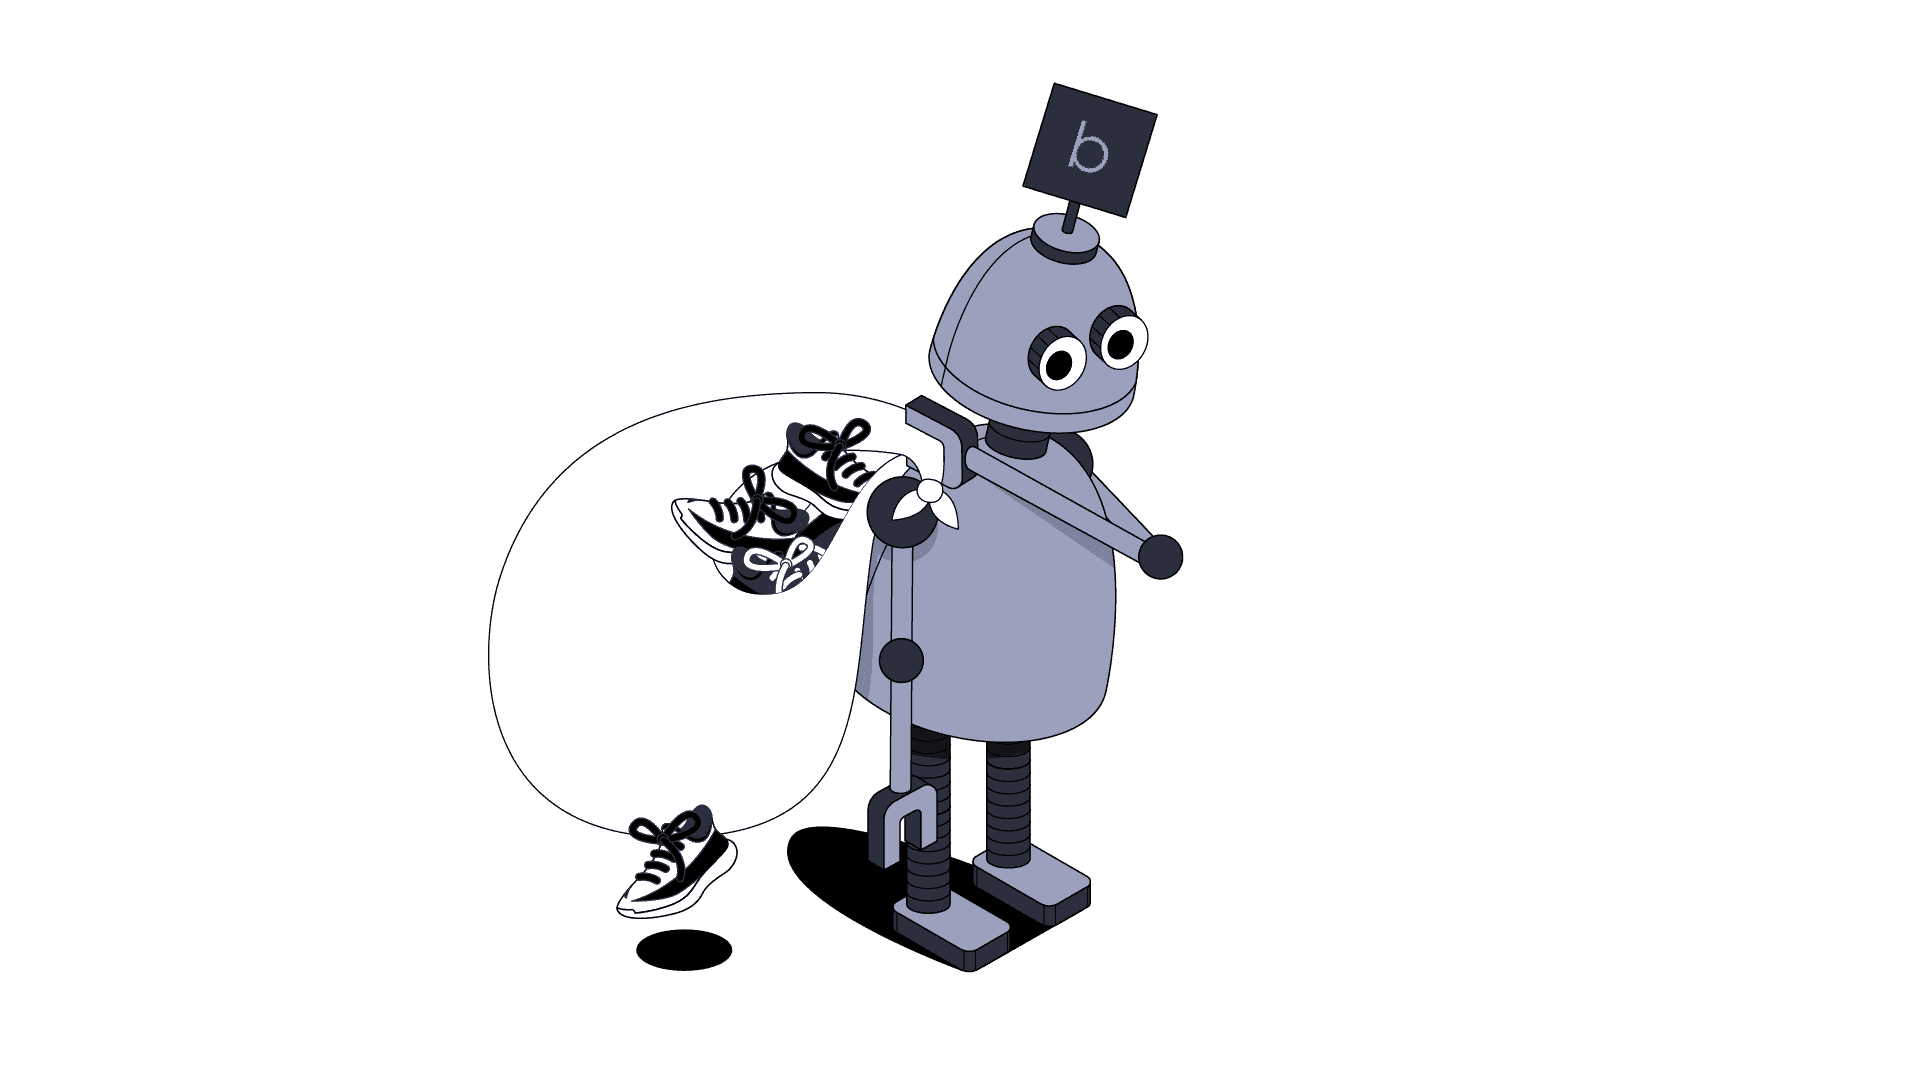 Balkobot robot carrying a bag of sneakers